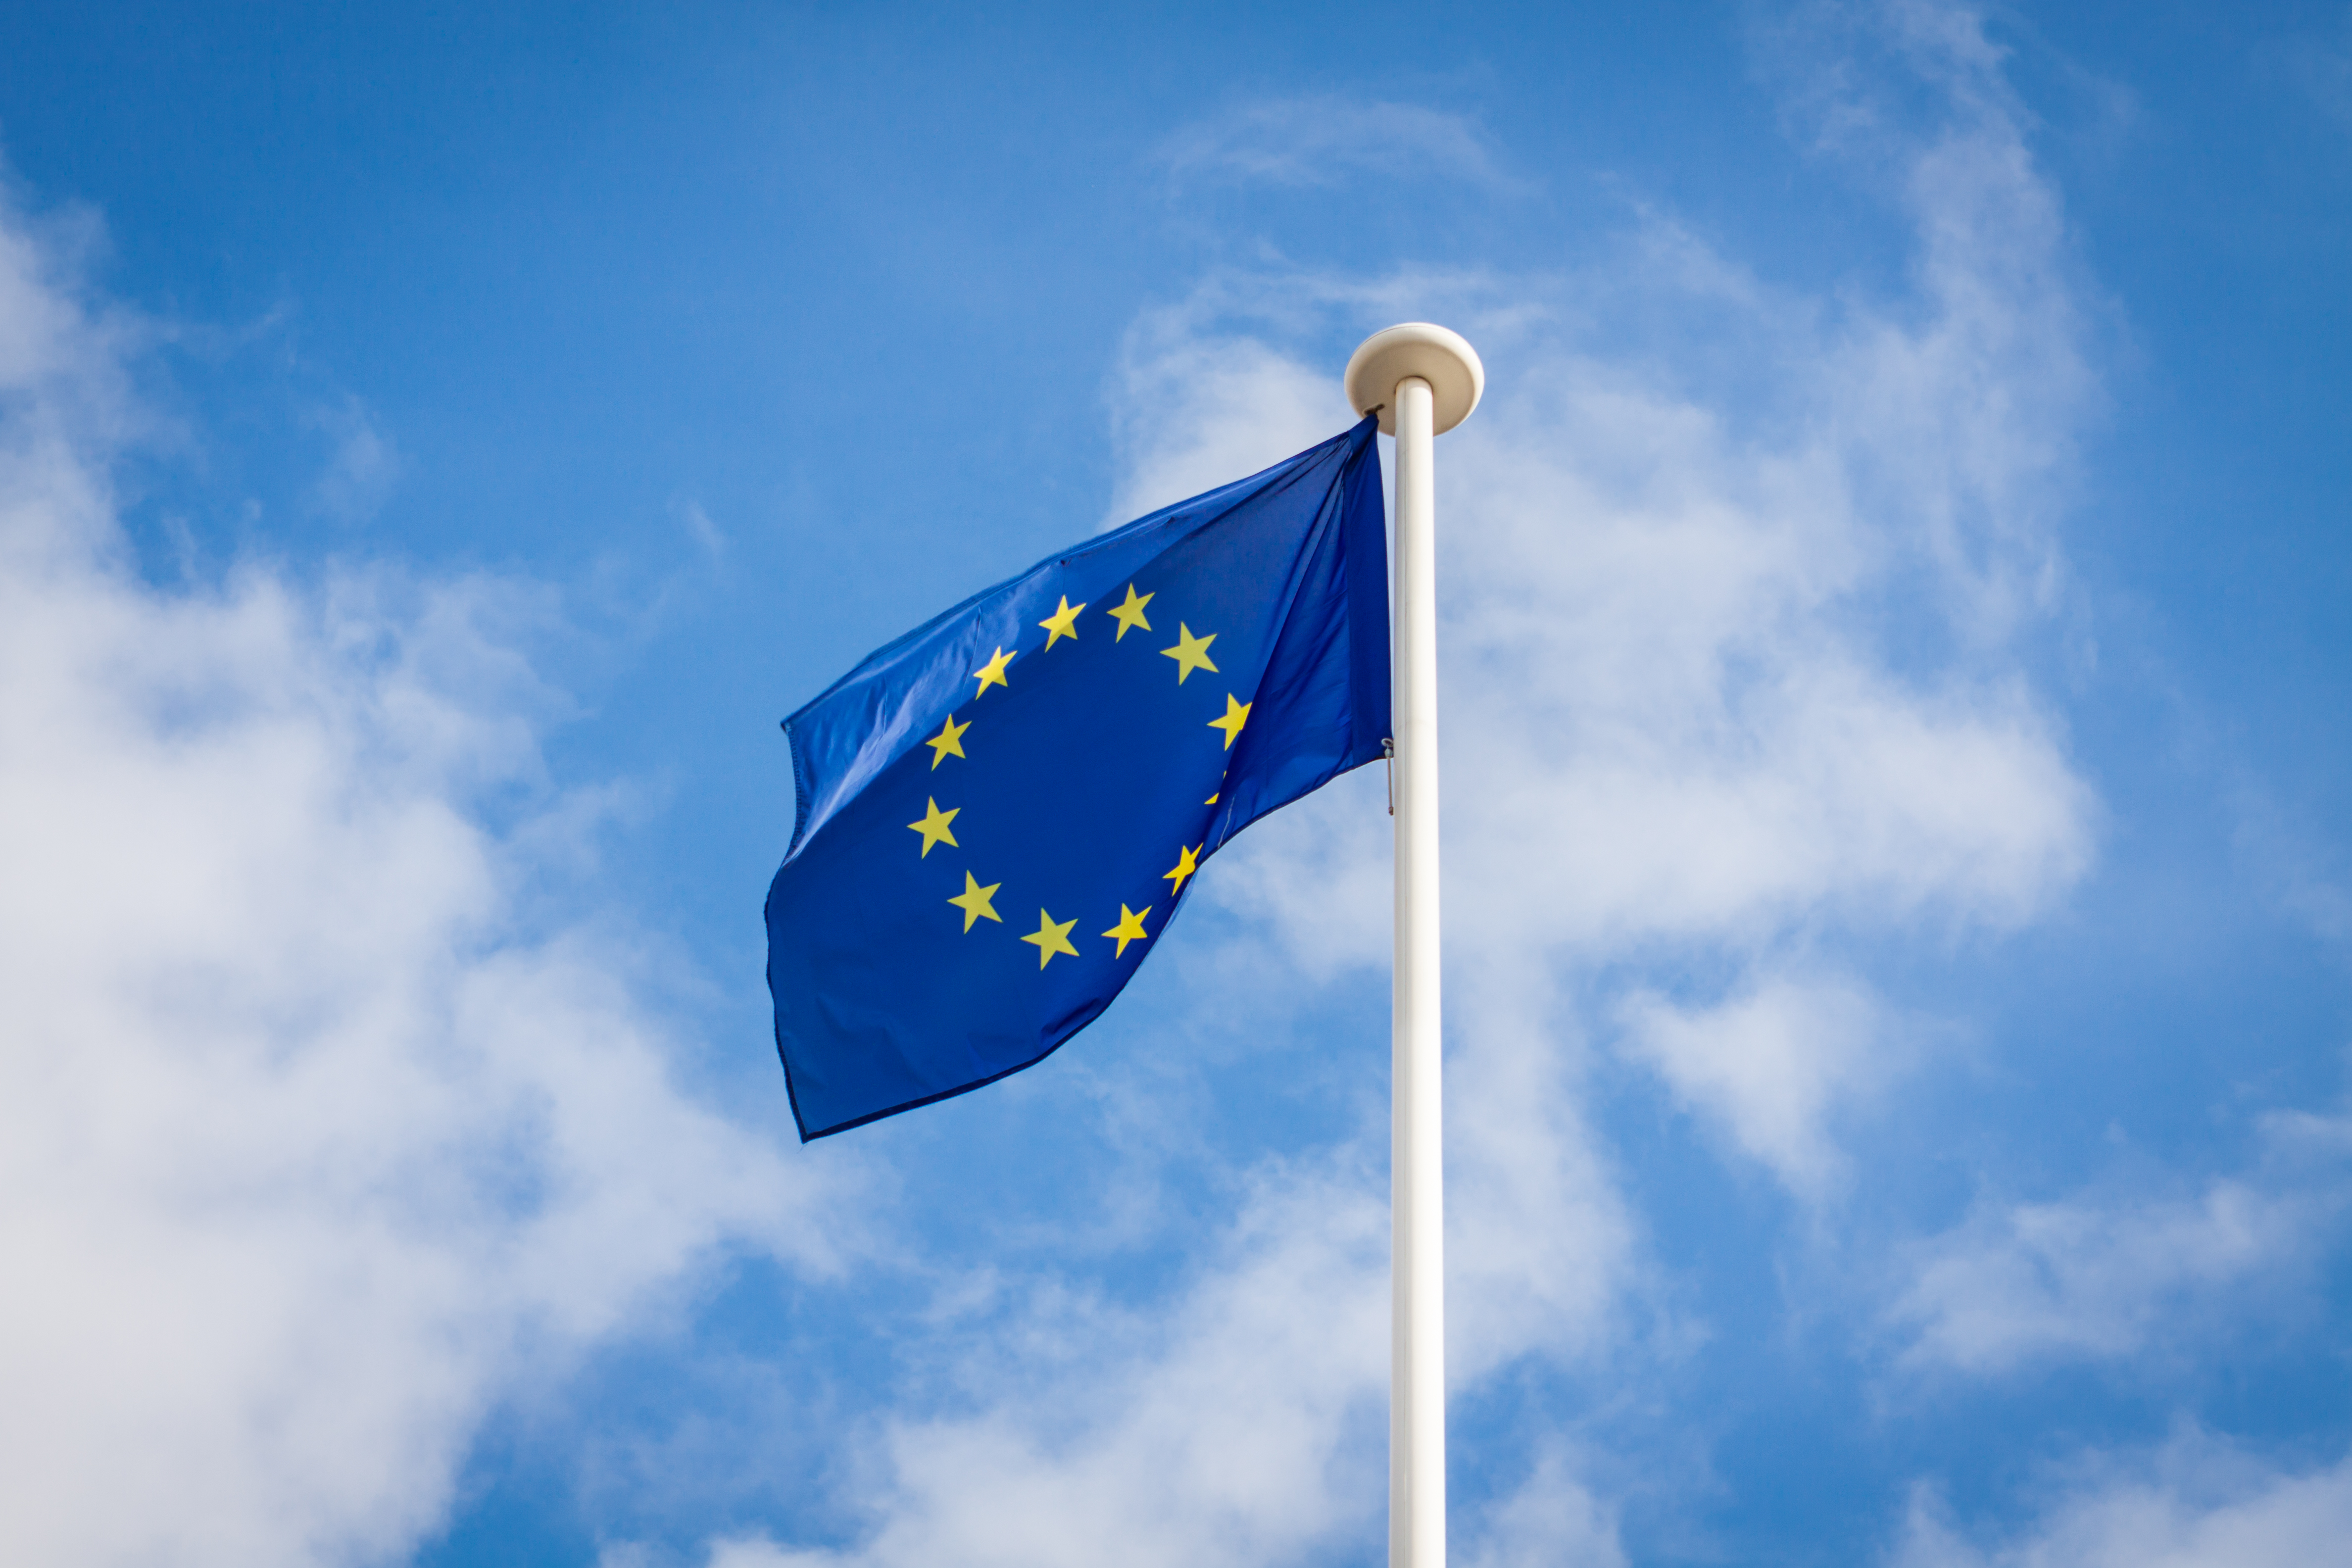 The fluttering flag of European Union on a pole, with a blue sky with white clouds in the background